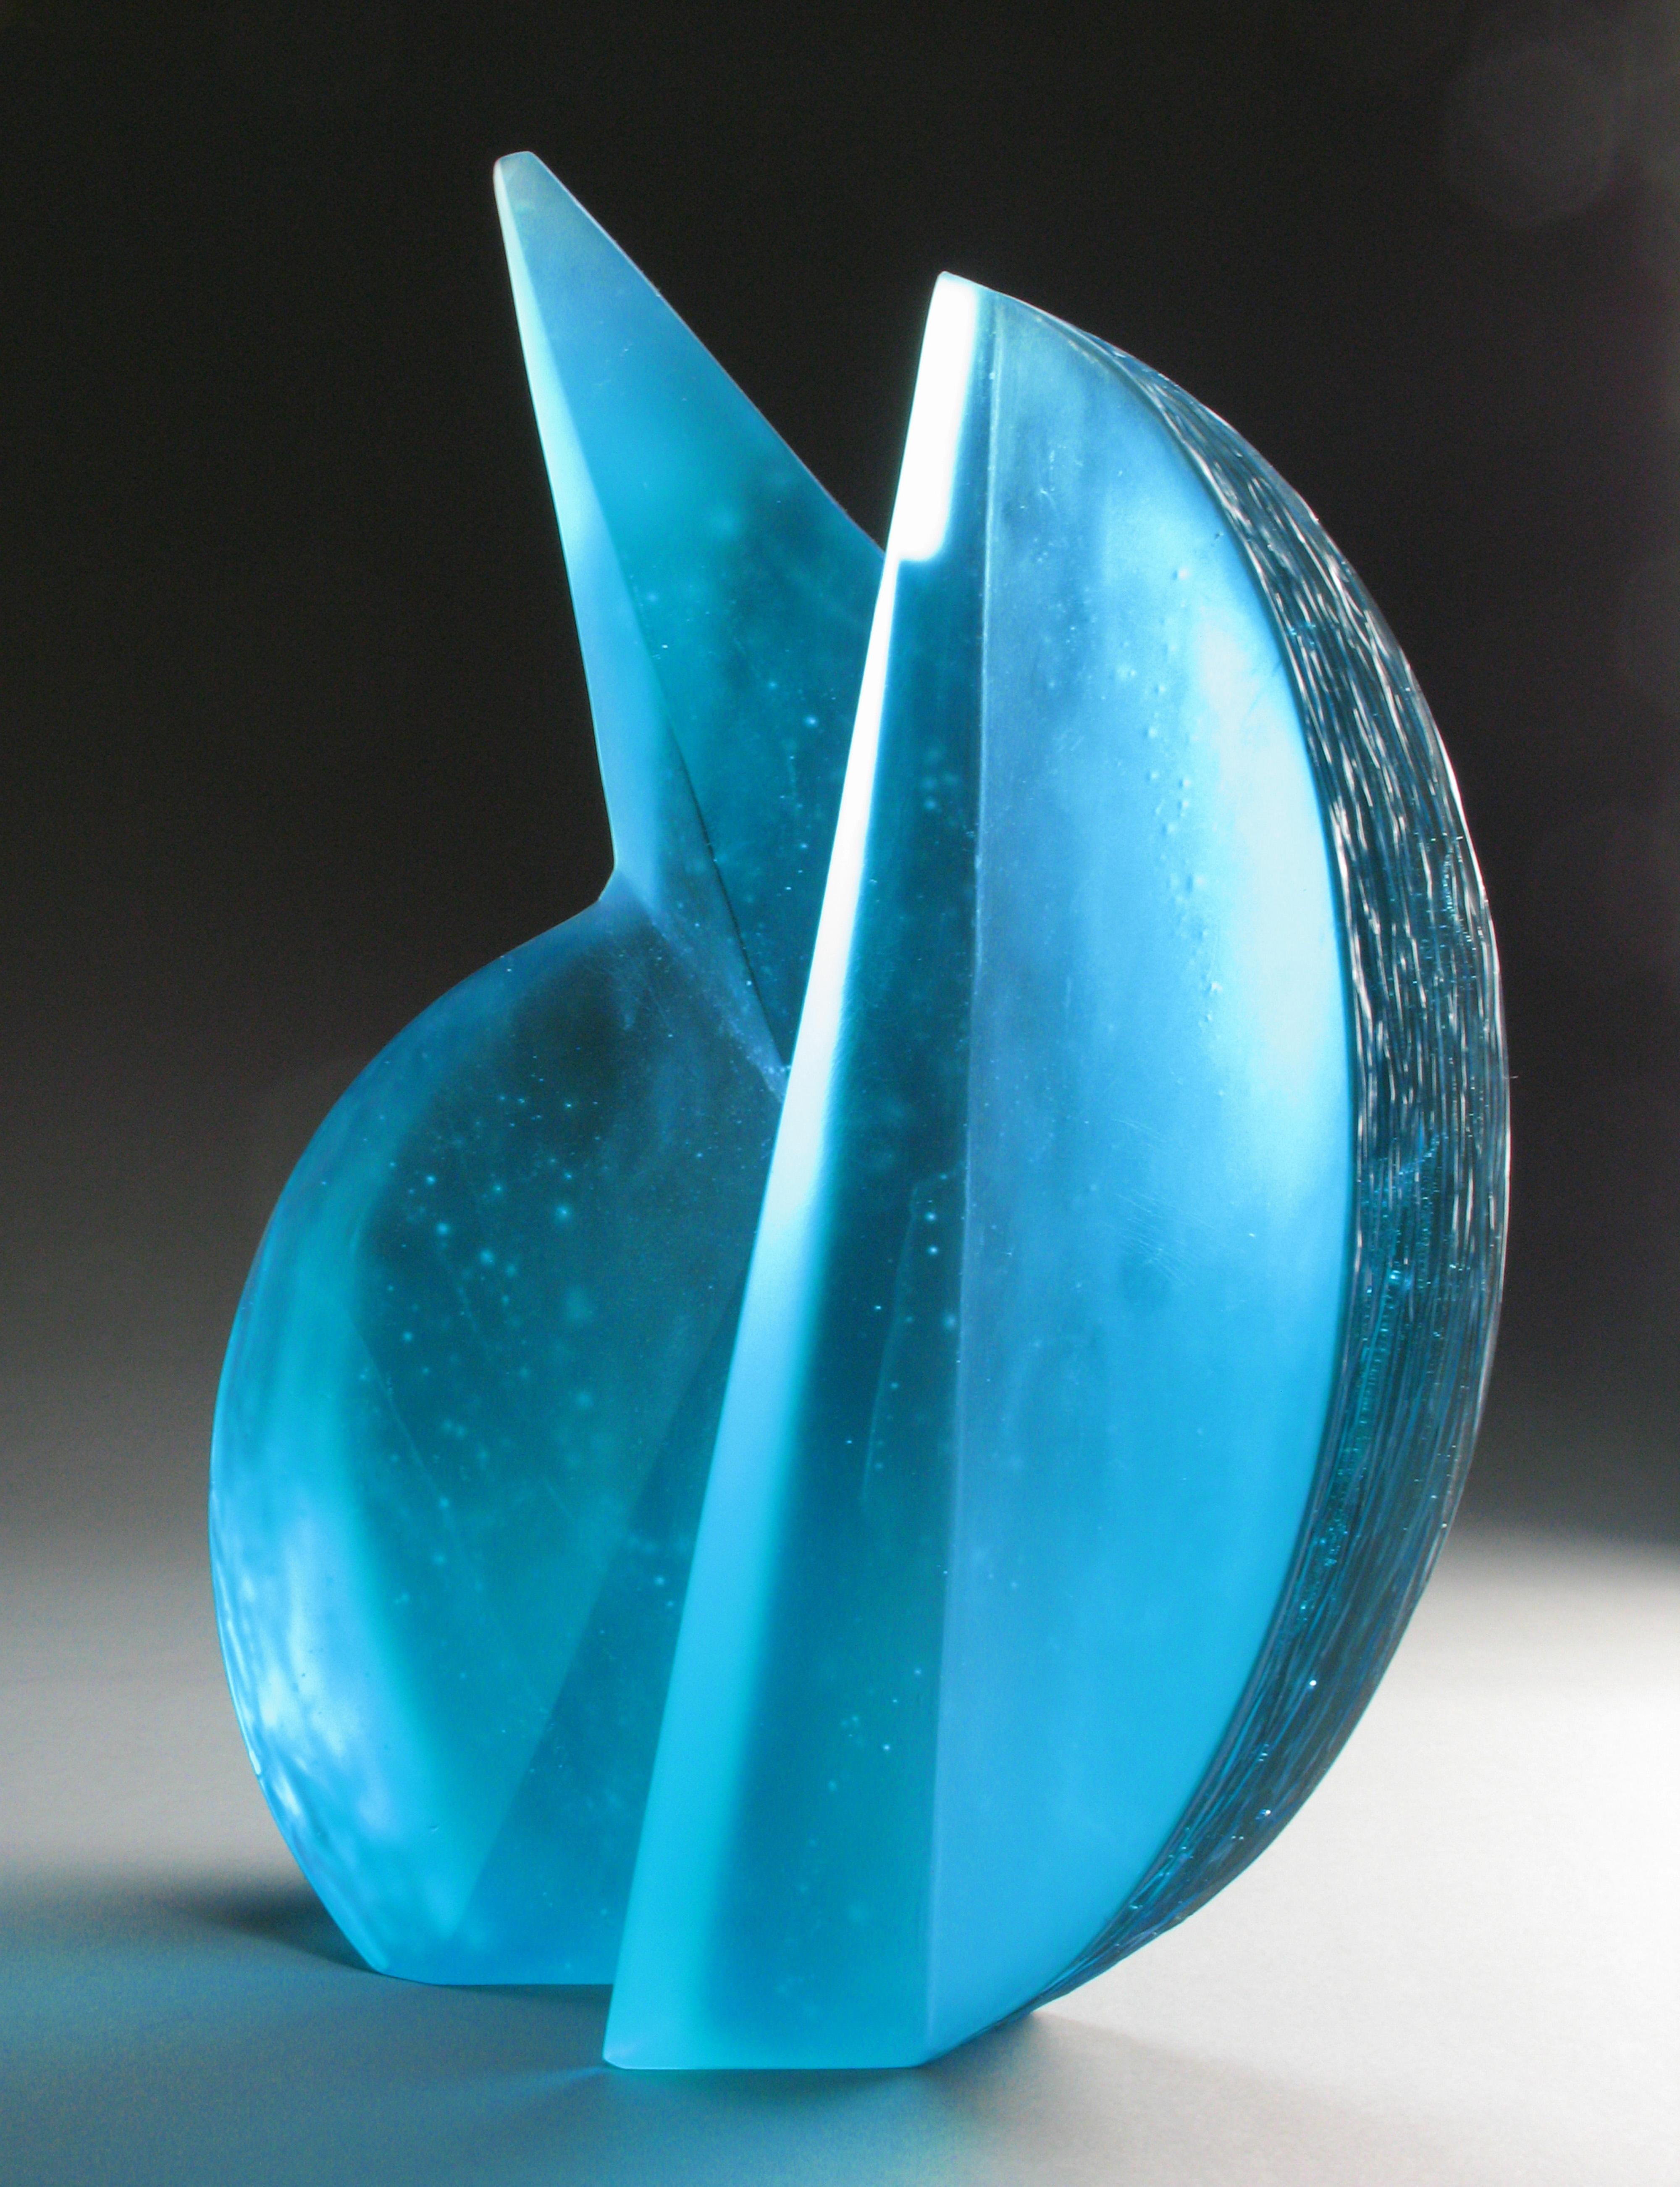 Chad Holliday Abstract Sculpture - 'Balanced Oblique' Abstract Geometric Glass Sculpture